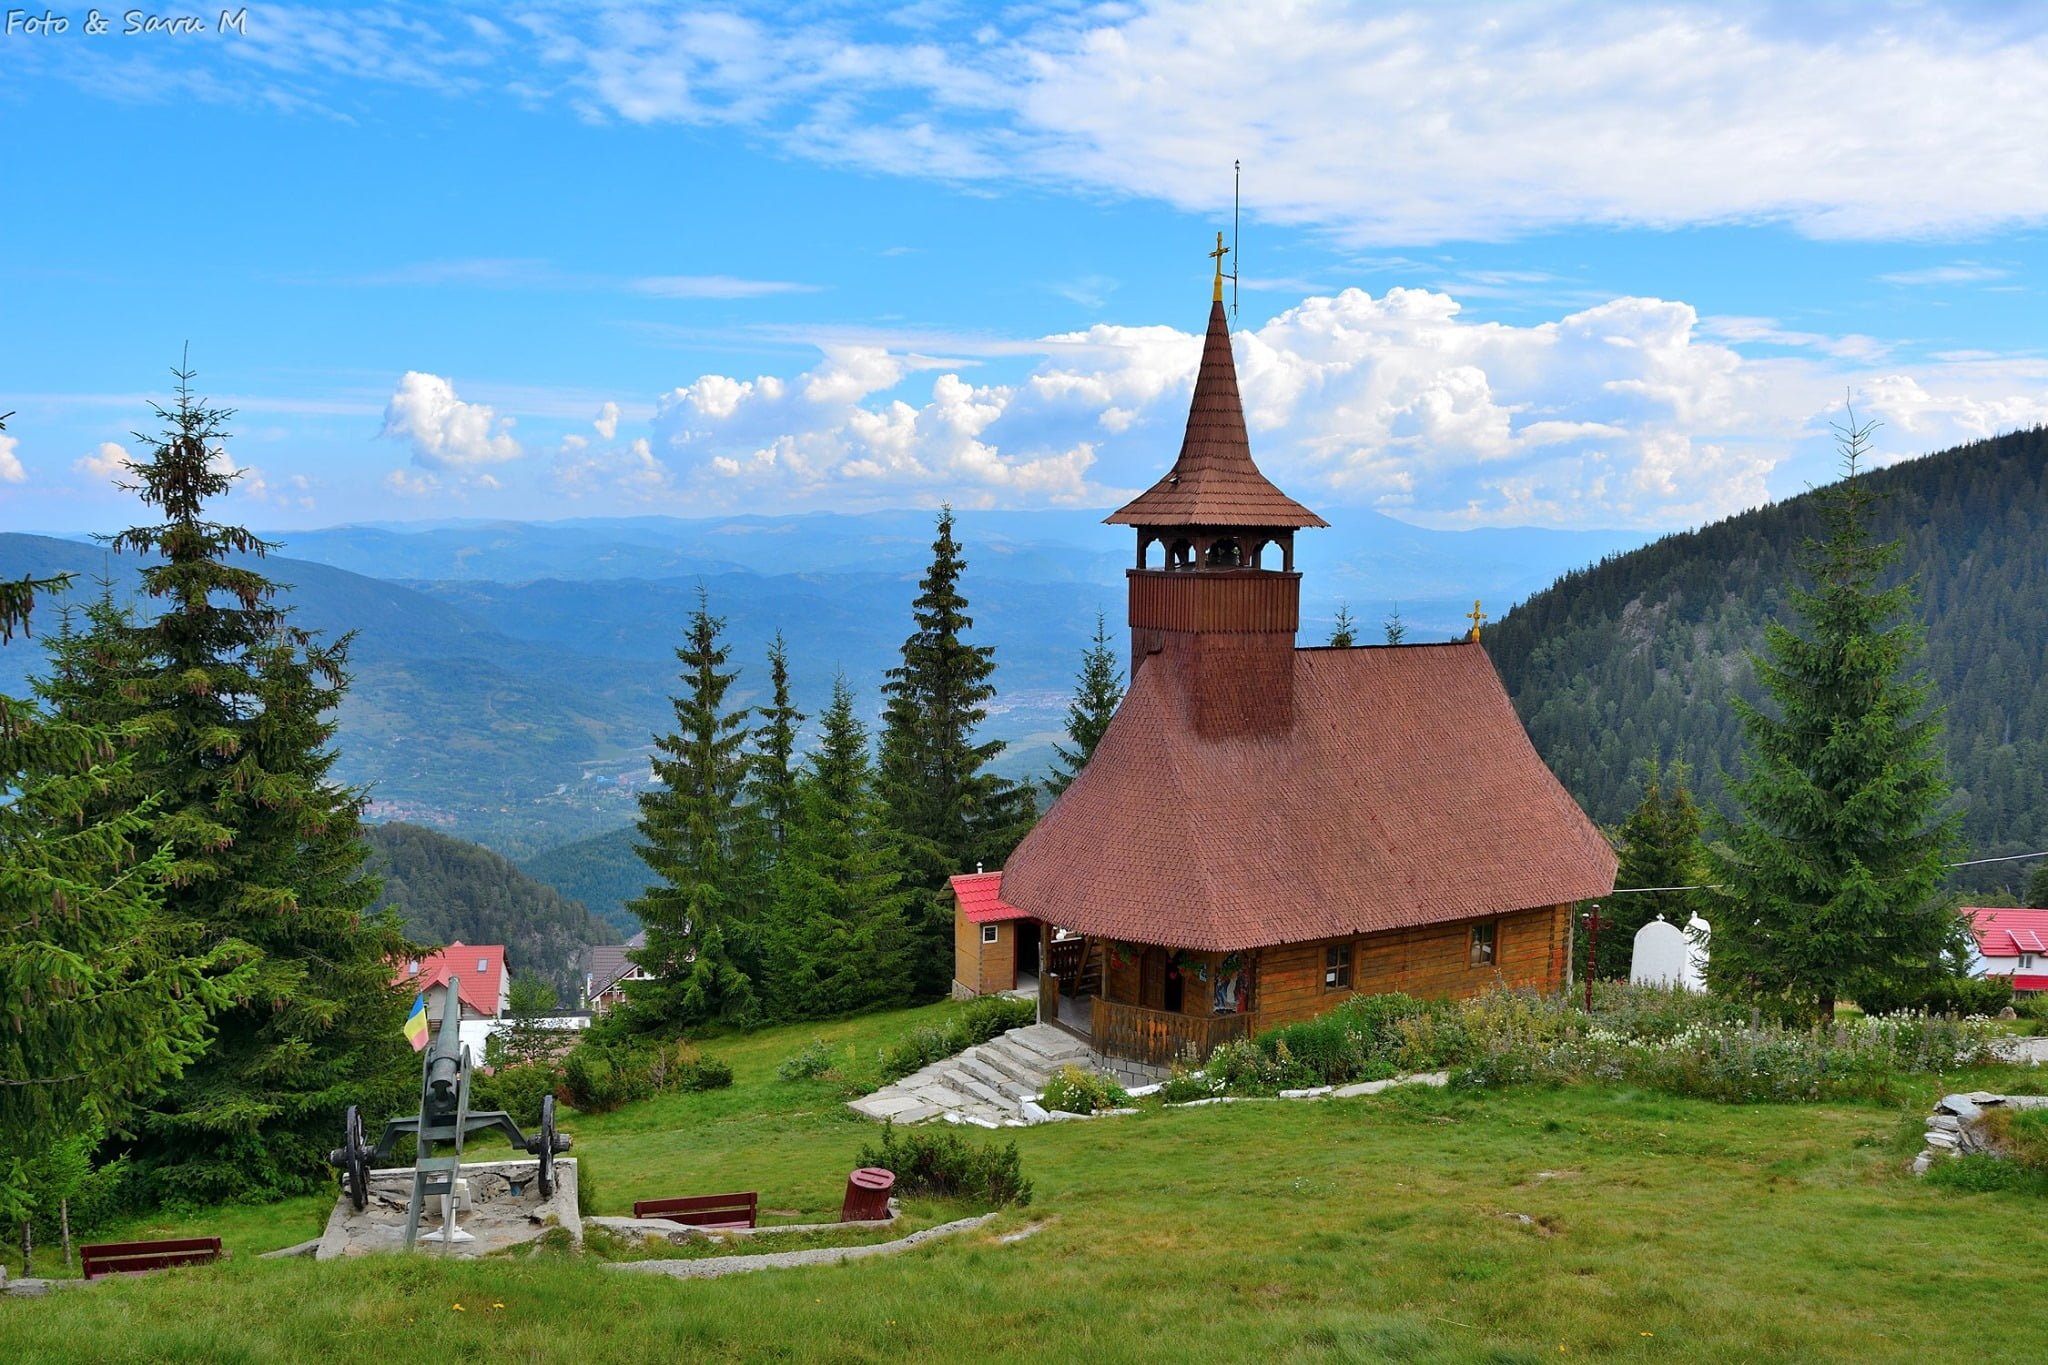 Straja Hermitage – the mountain church was built in 3 months, 3 weeks and 3 days